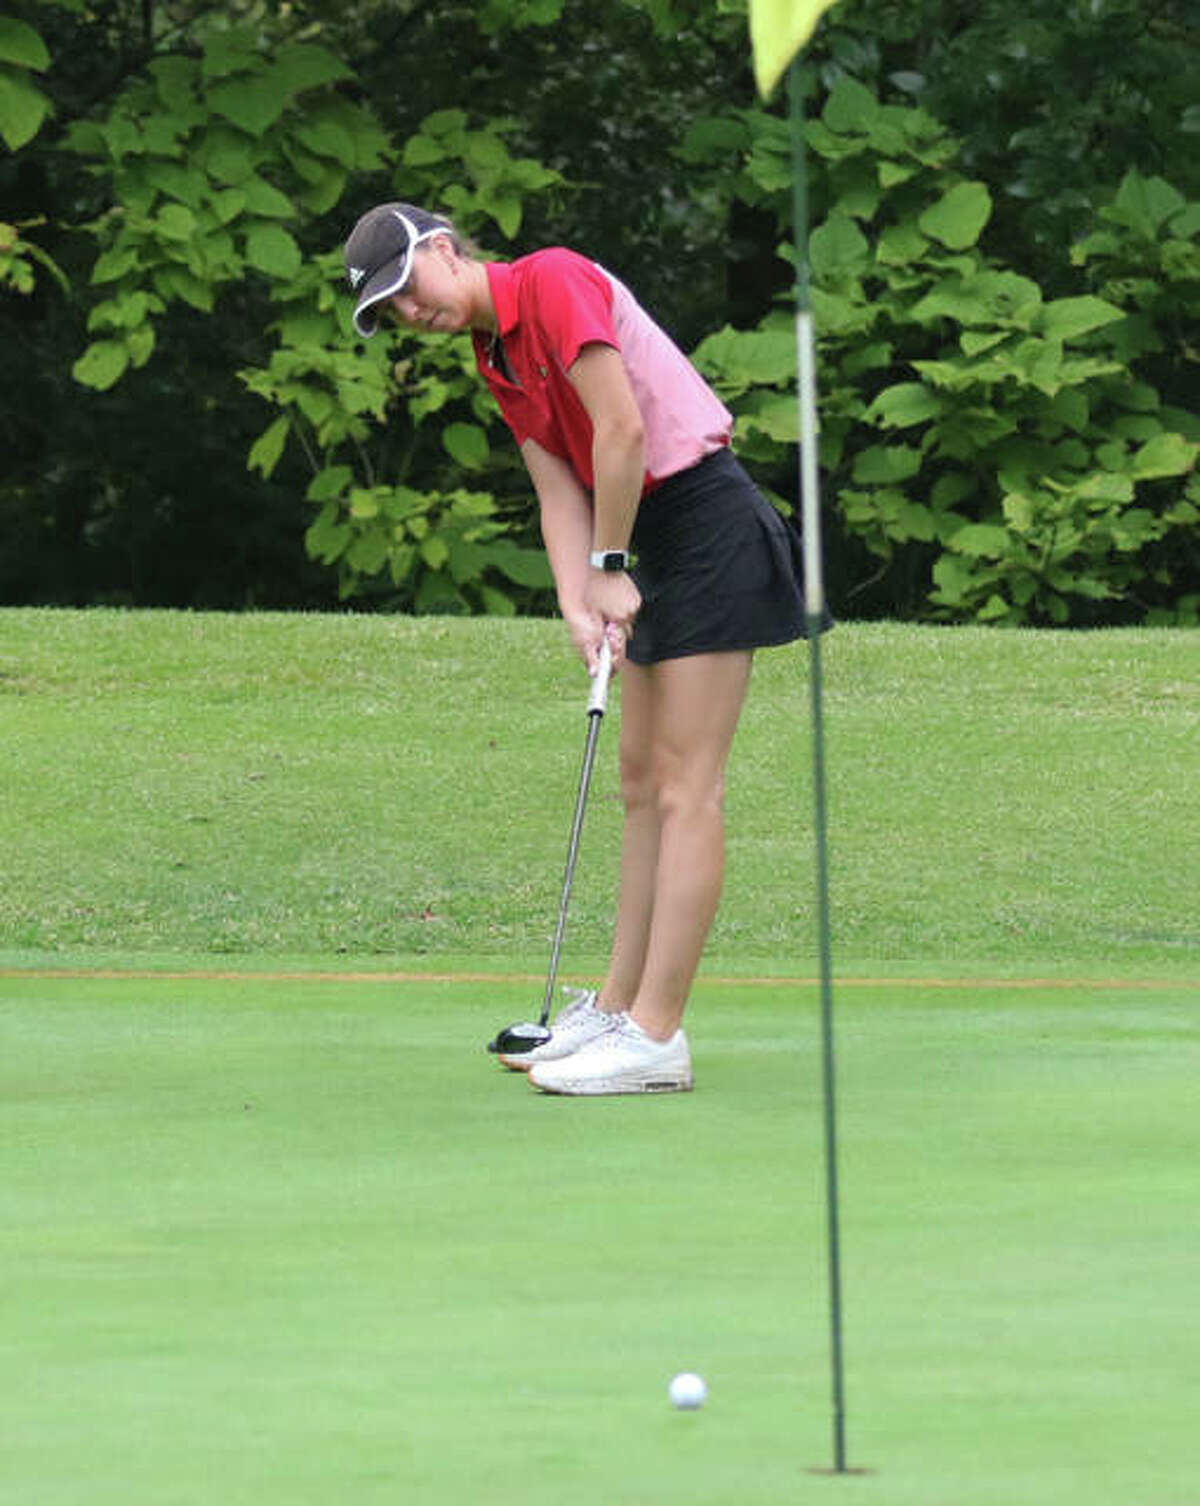 Alton’s Natalie Messinger tracks her putt on hole No. 1 at Rolling Hills in Saturday’s Alton Classic. Messinger placed third in the tourney at 76.